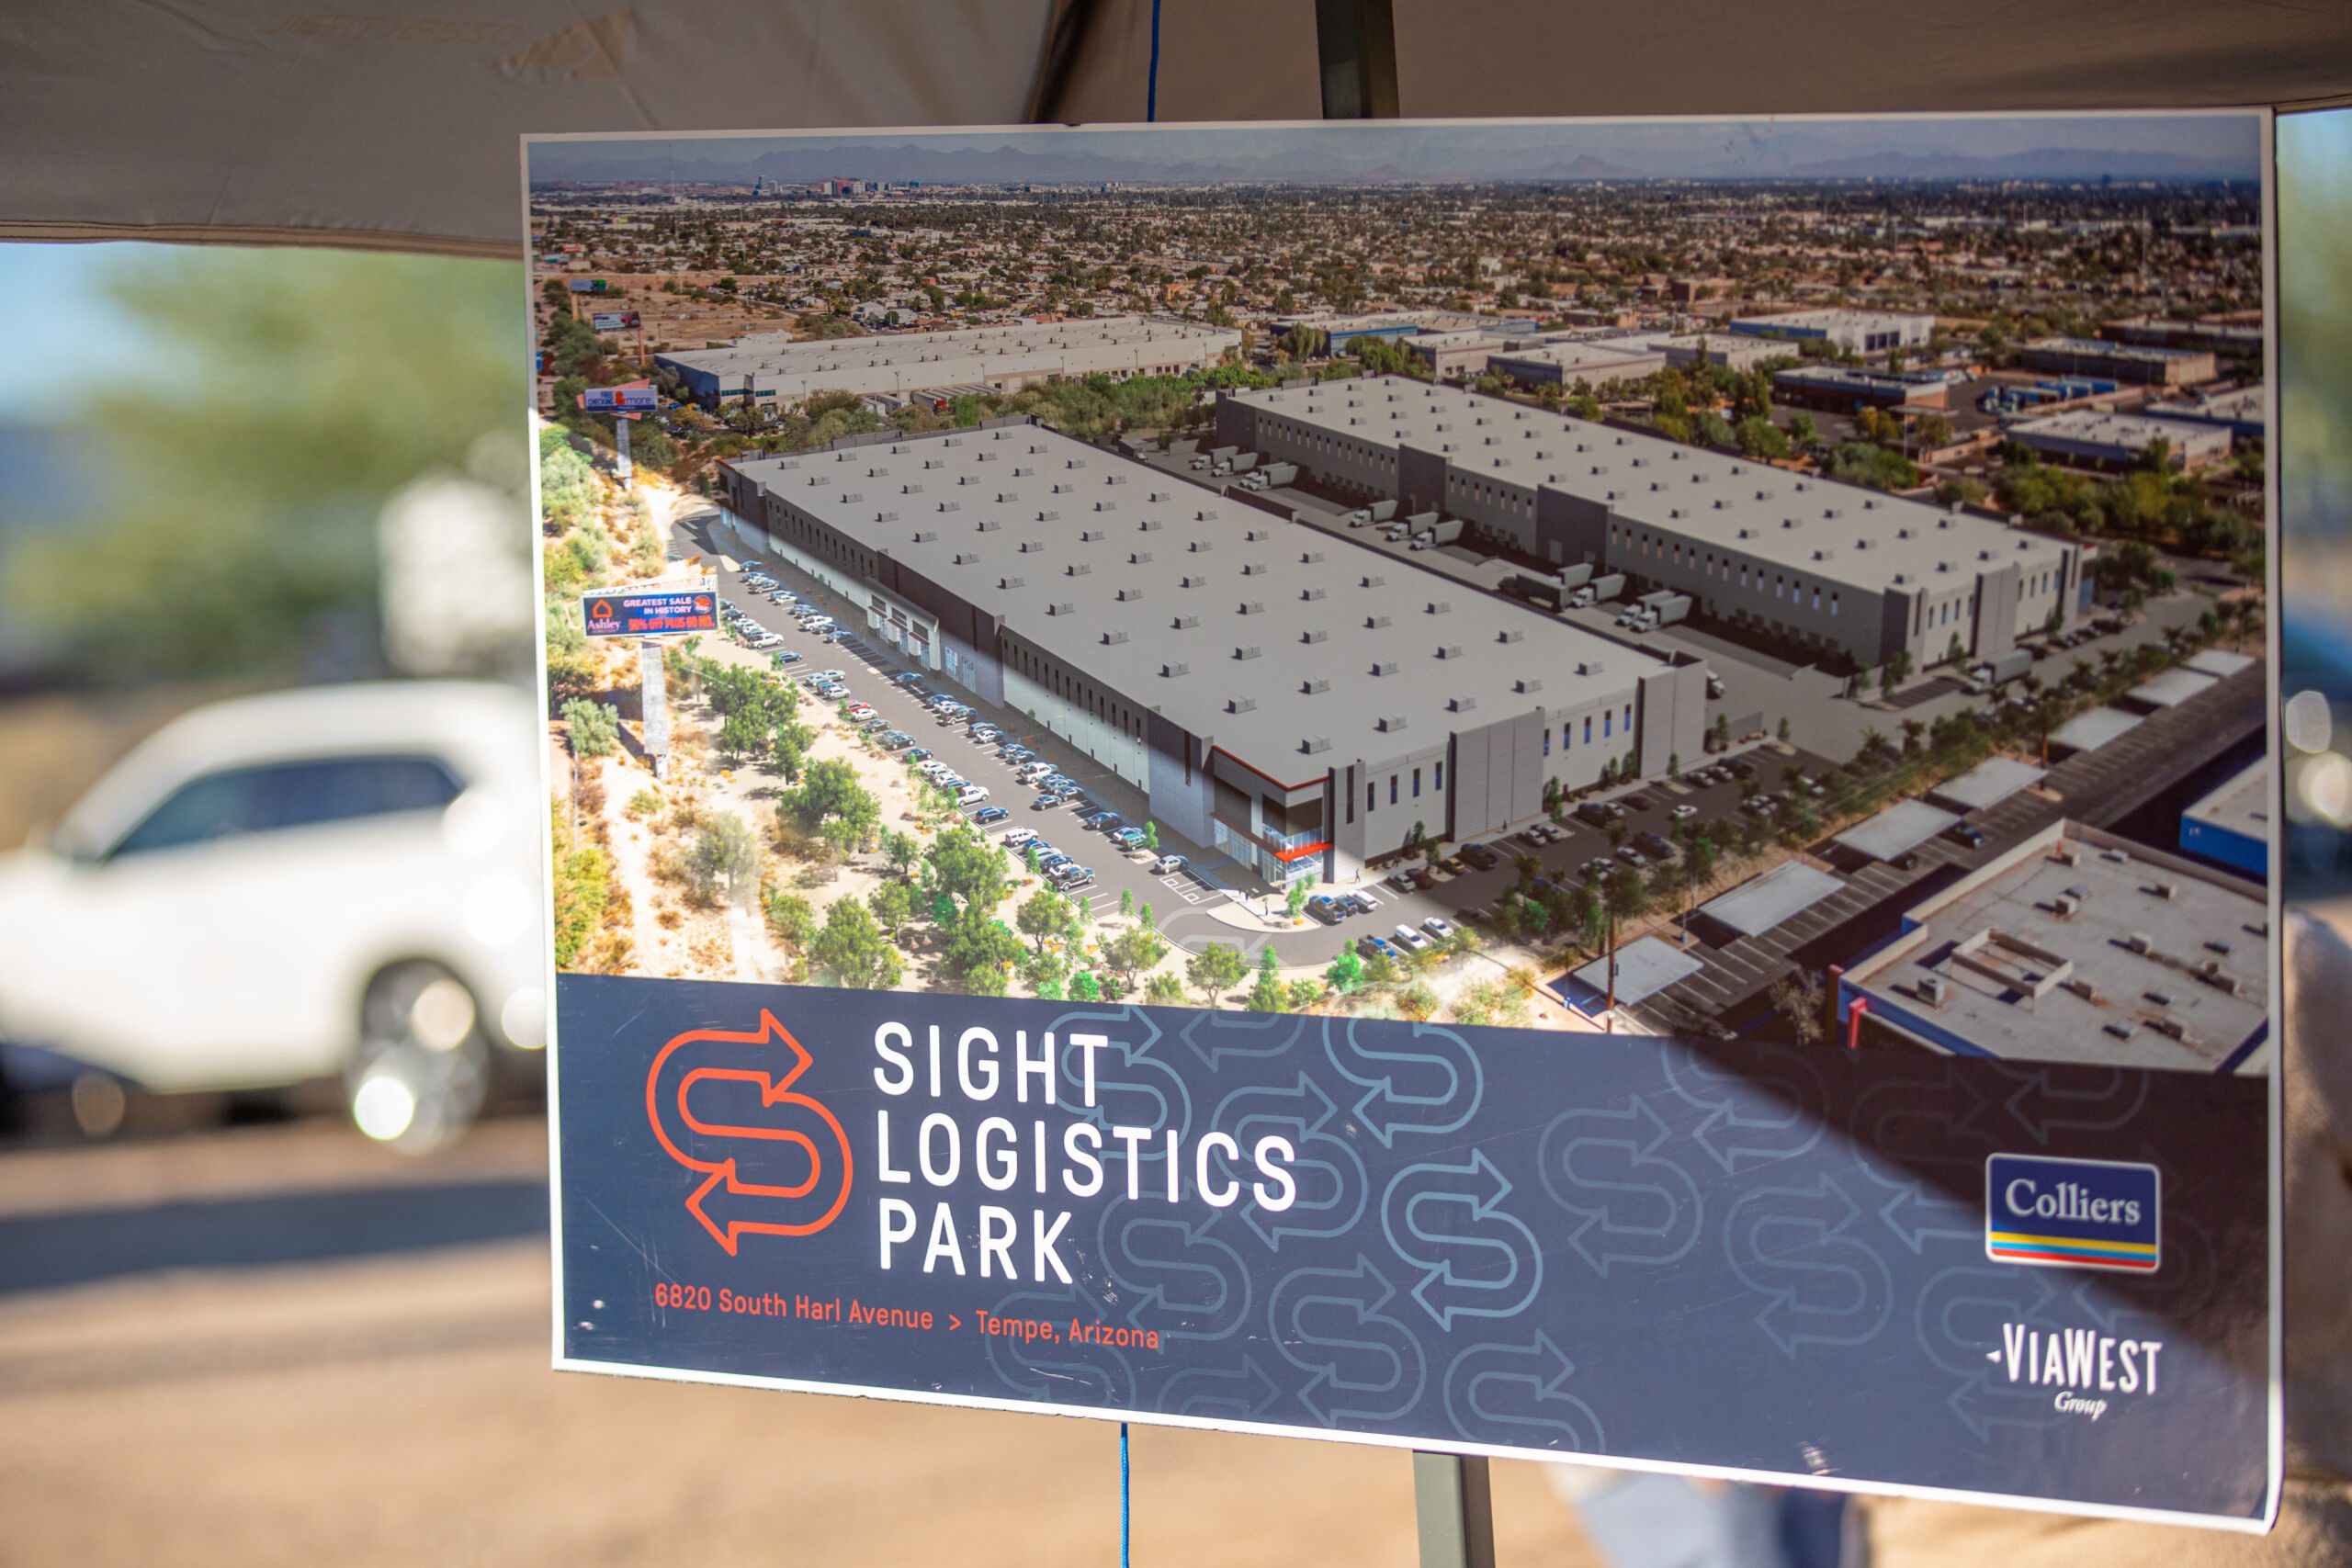 ViaWest Group breaks ground on Sight Logistics Park in Tempe, Arizona.